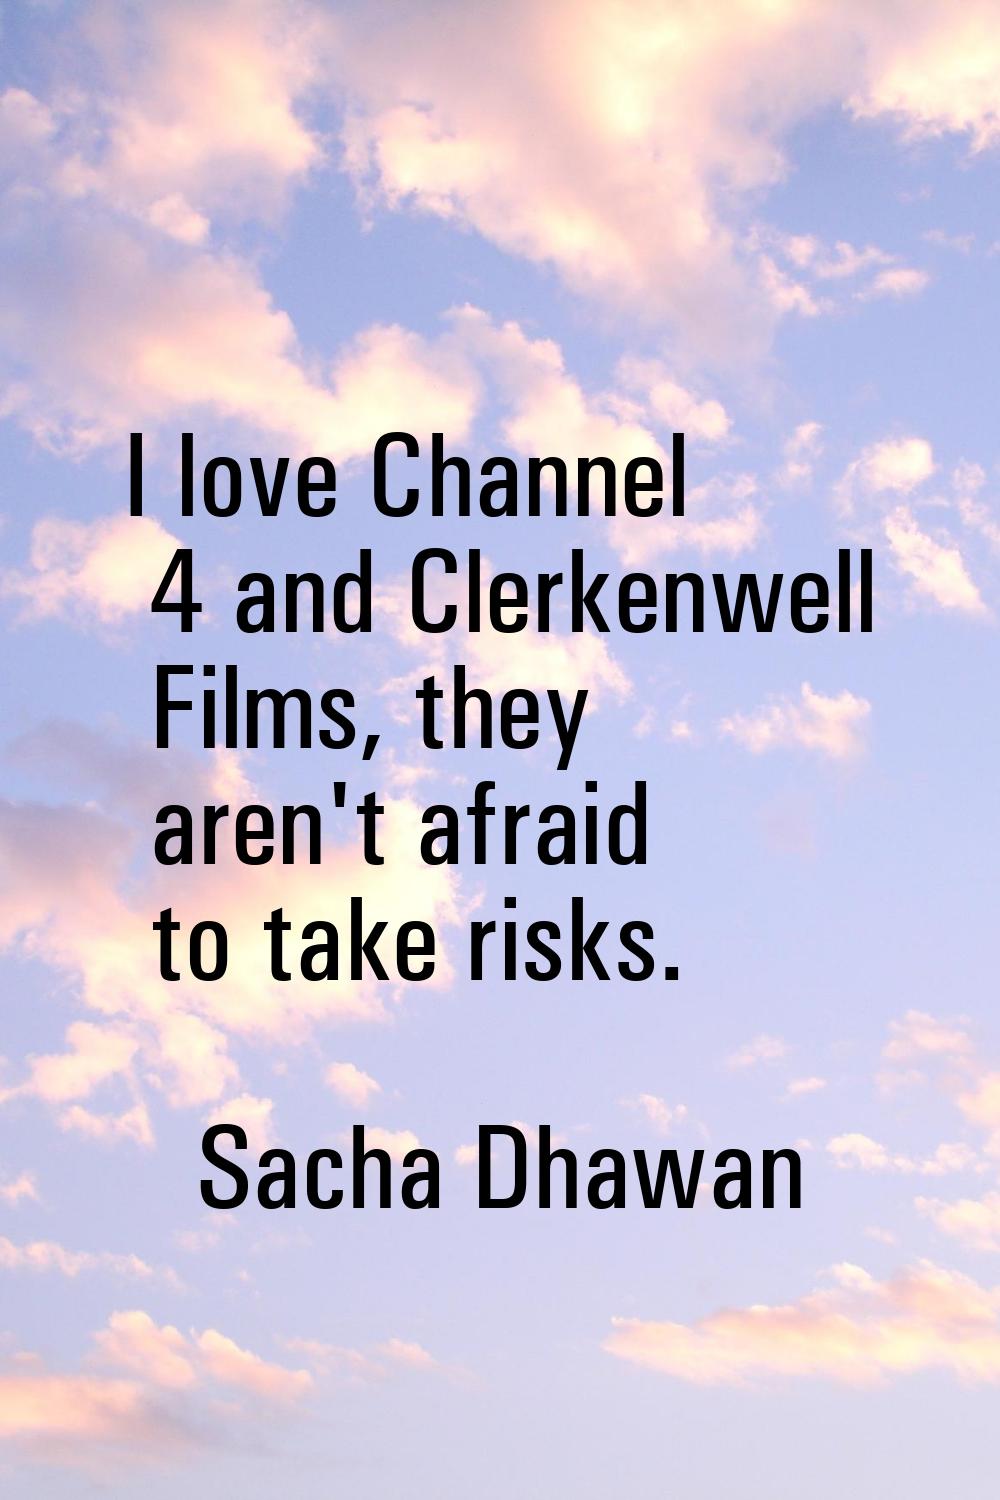 I love Channel 4 and Clerkenwell Films, they aren't afraid to take risks.